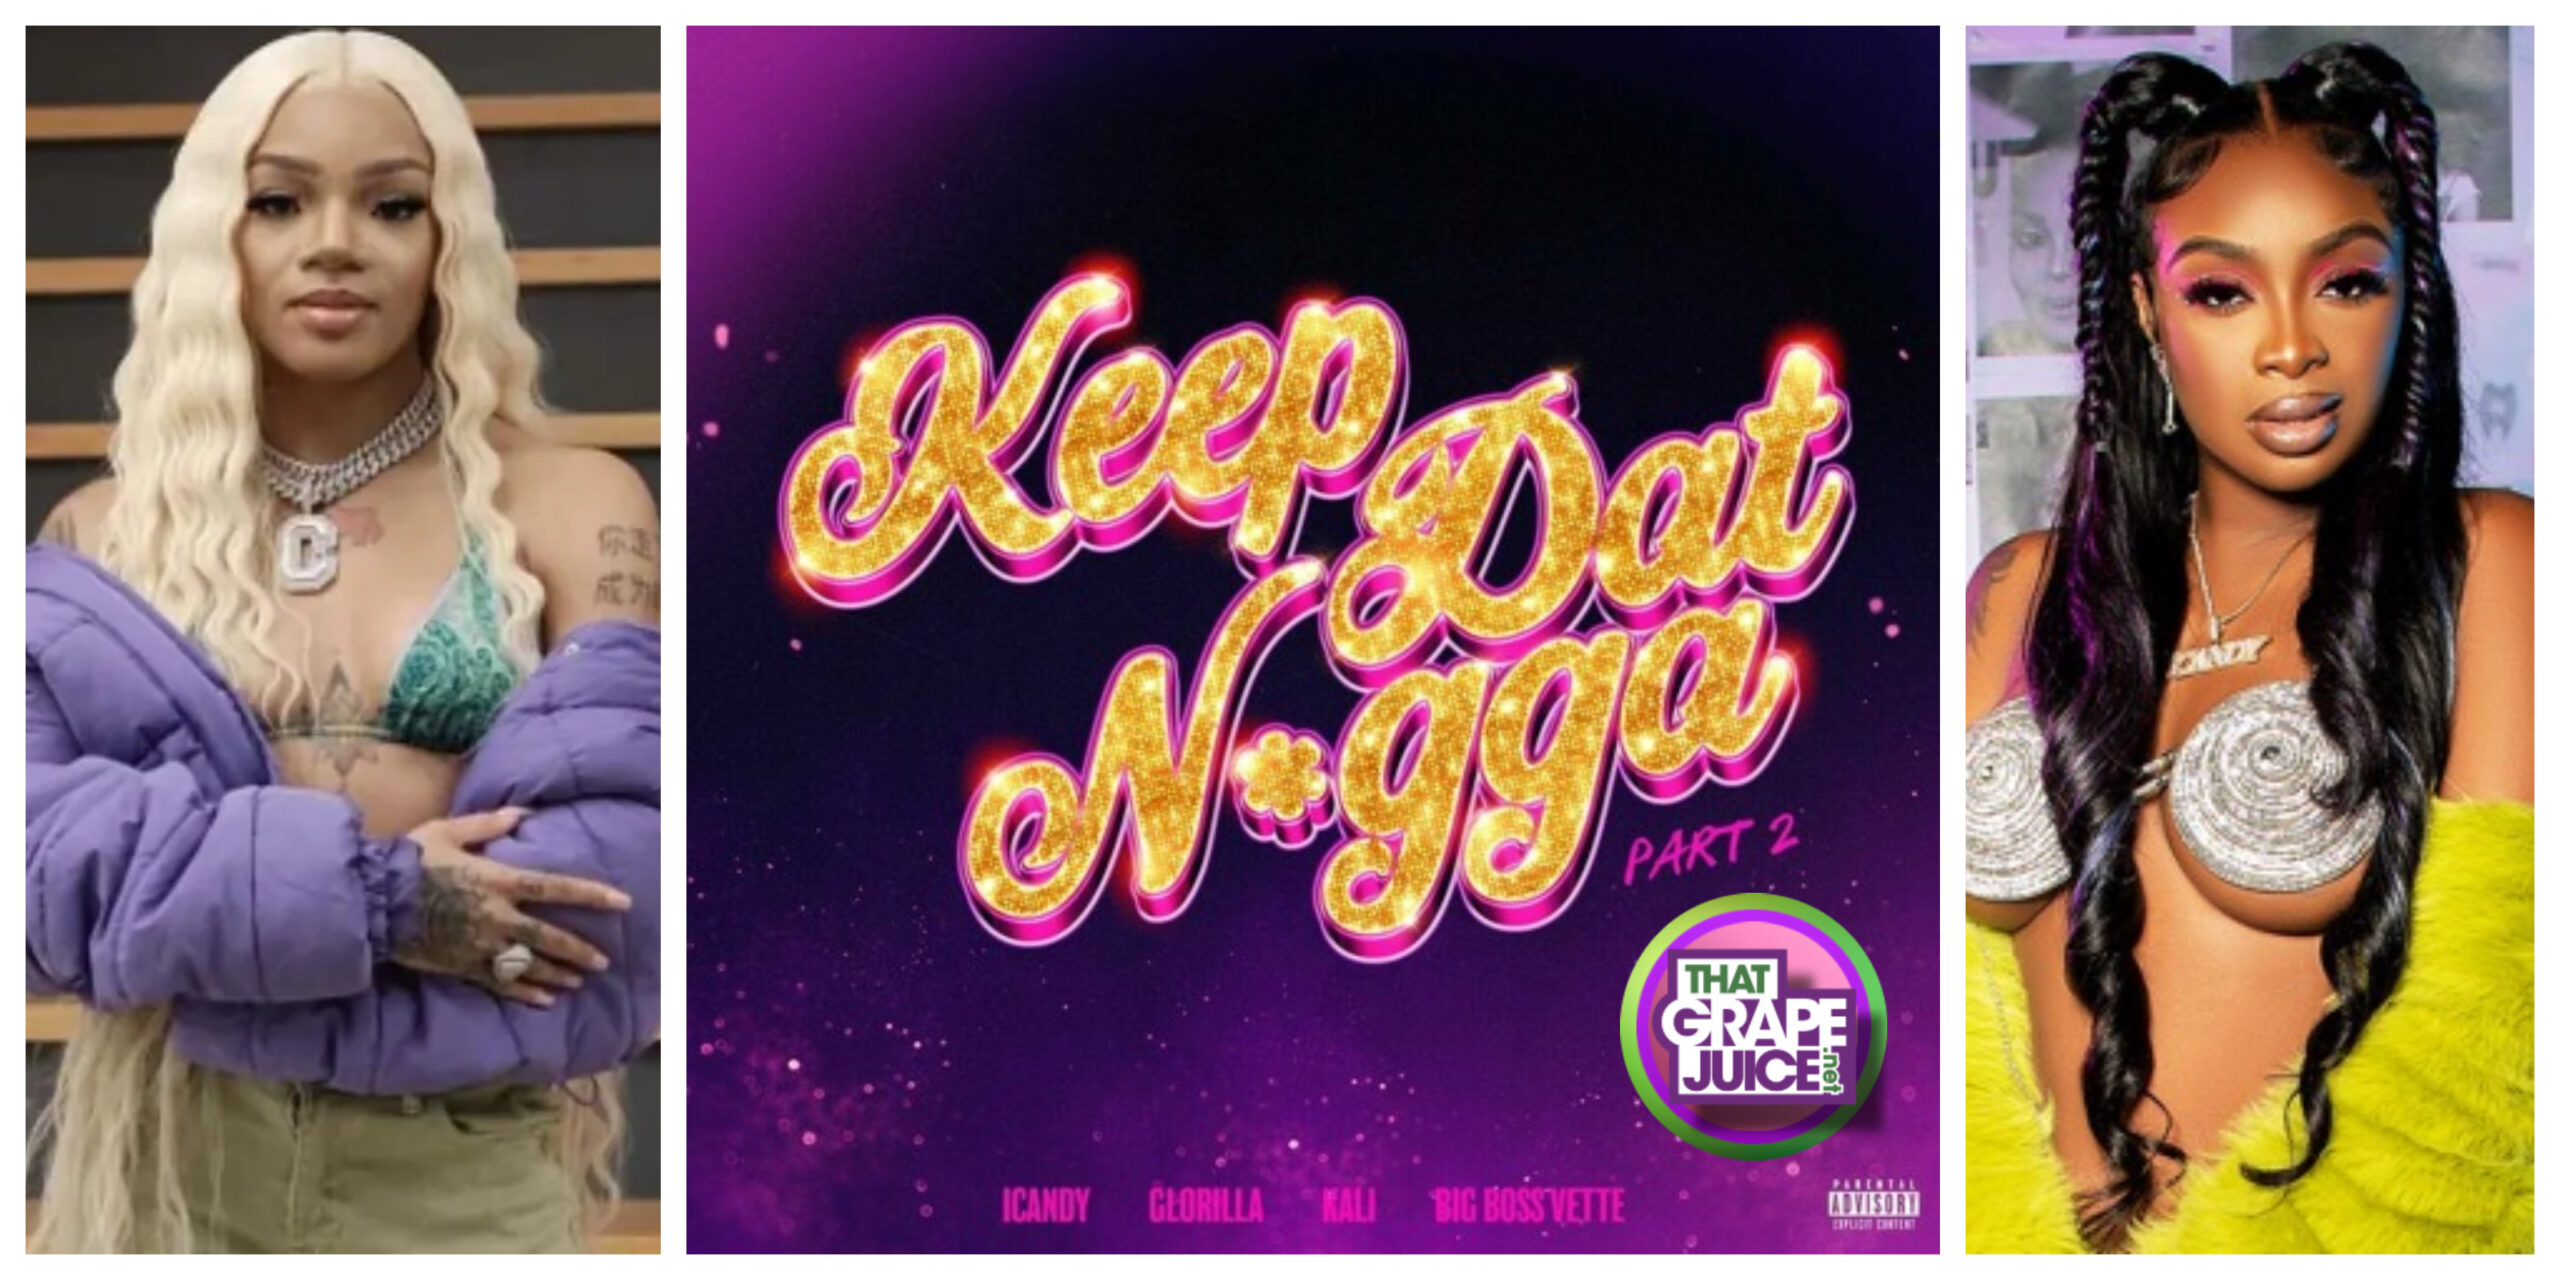 New Song: iCandy – ‘Keep That N***a (Part 2)’ [featuring GloRilla, Kali, & Big Boss Vette]